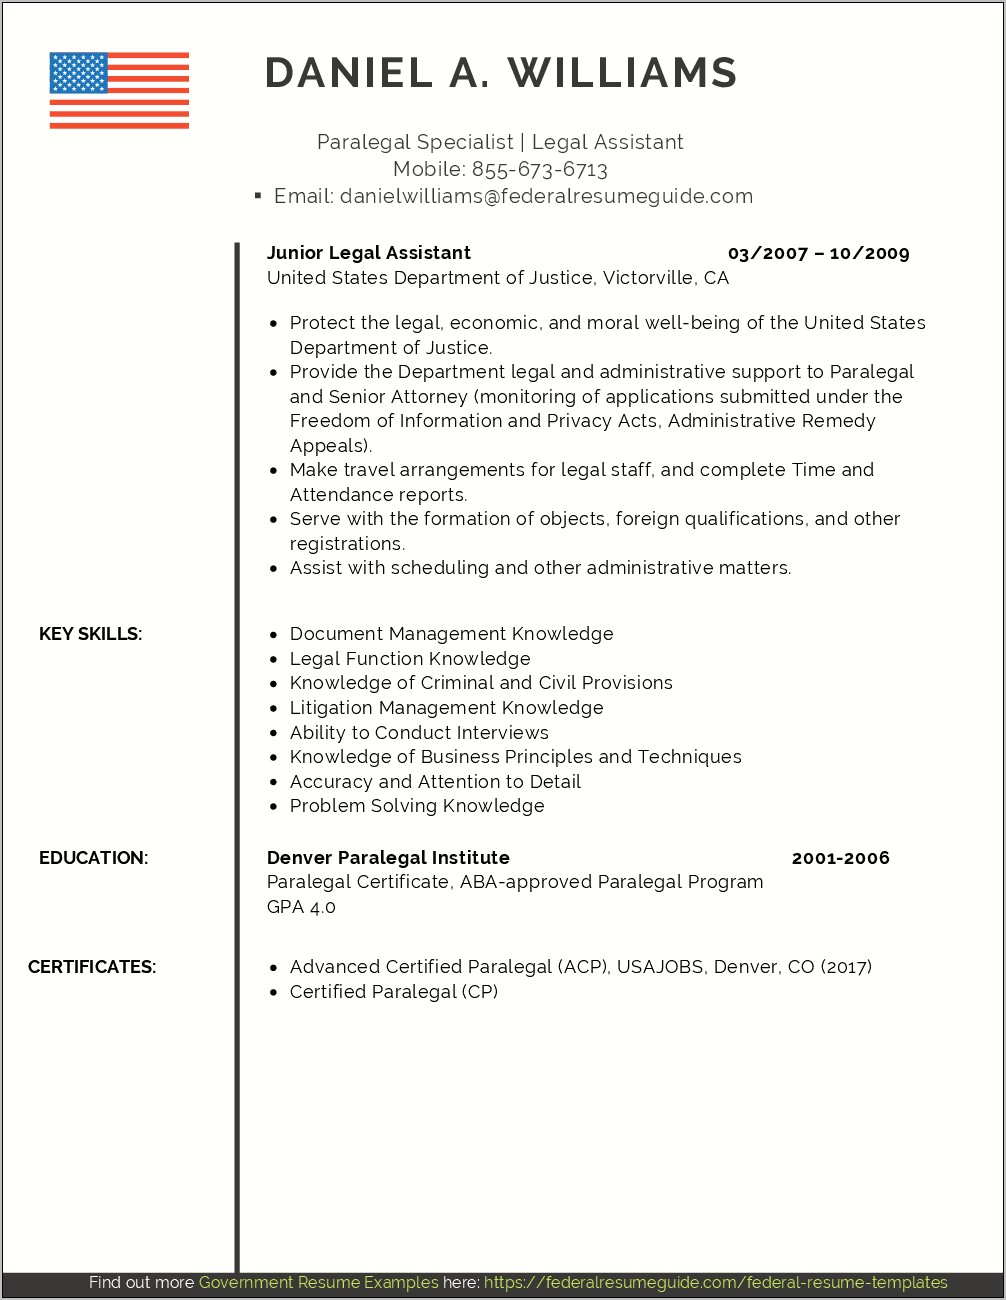 Resume Objectives For Legal Secretary - Resume Example Gallery